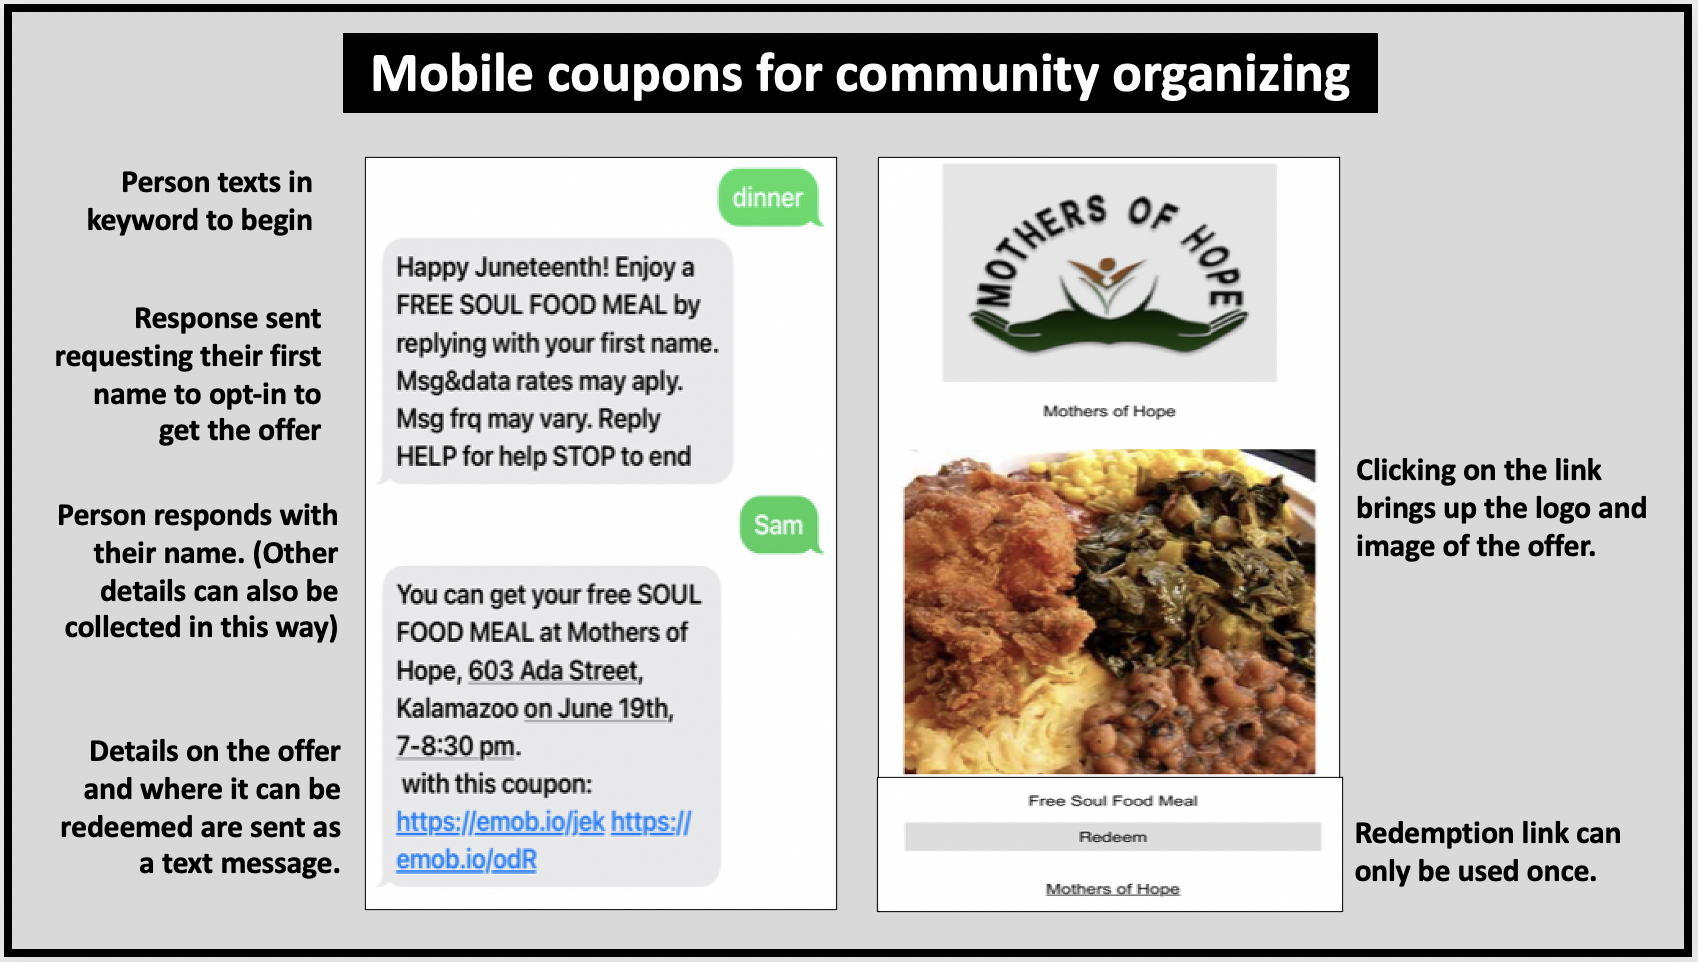 Use mobile coupons and chatbots for community organizing and building lists of opt-in contacts.